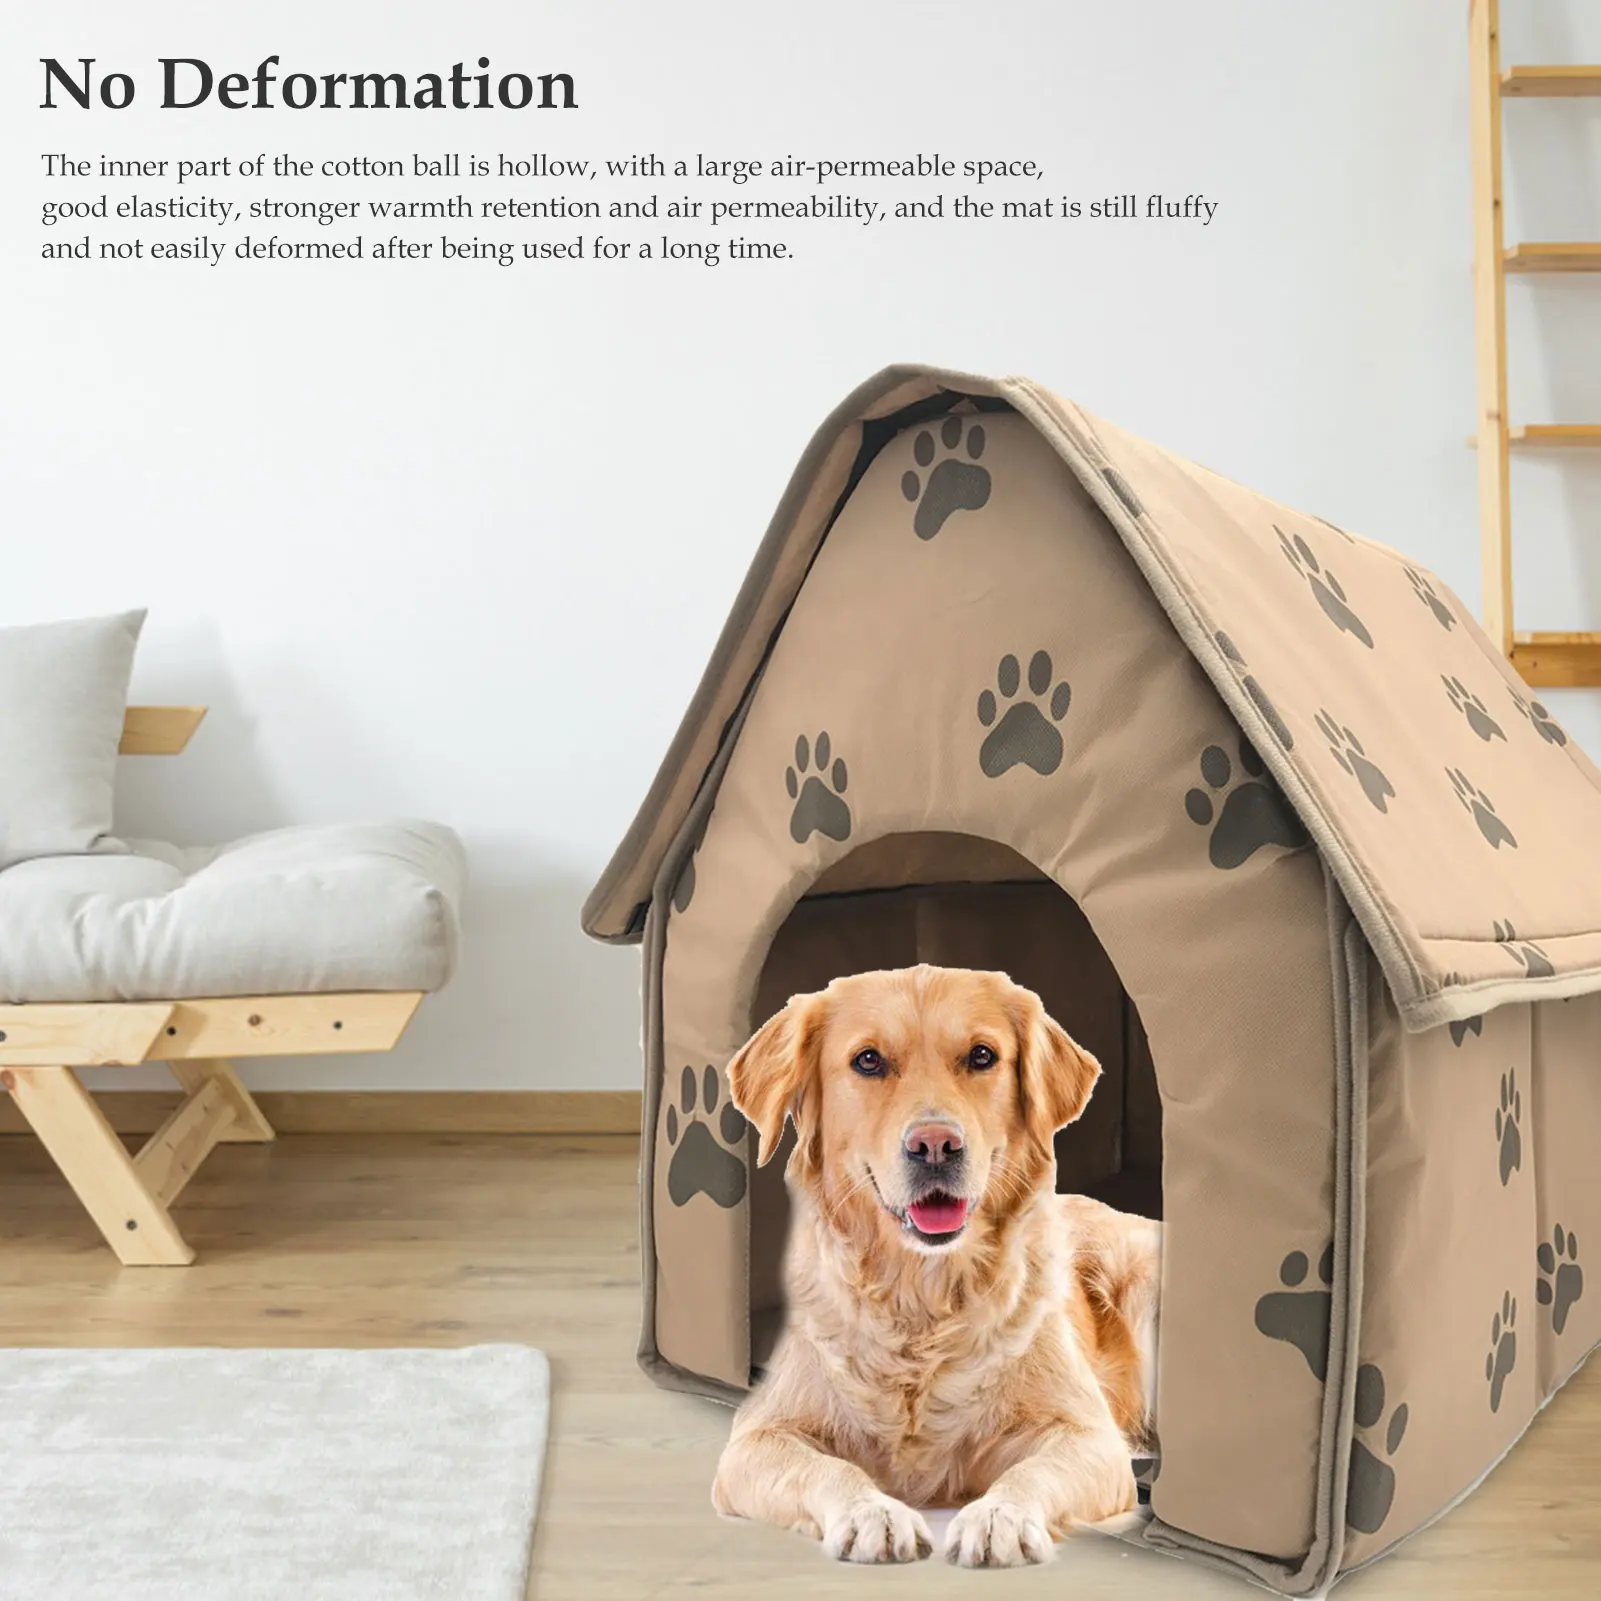 

Dog Bed Warm Cat House With Washable Mat Kitten Shelter Hut Puppies Kittens Rabbits Pets For Houses Porches Balconies Corridors